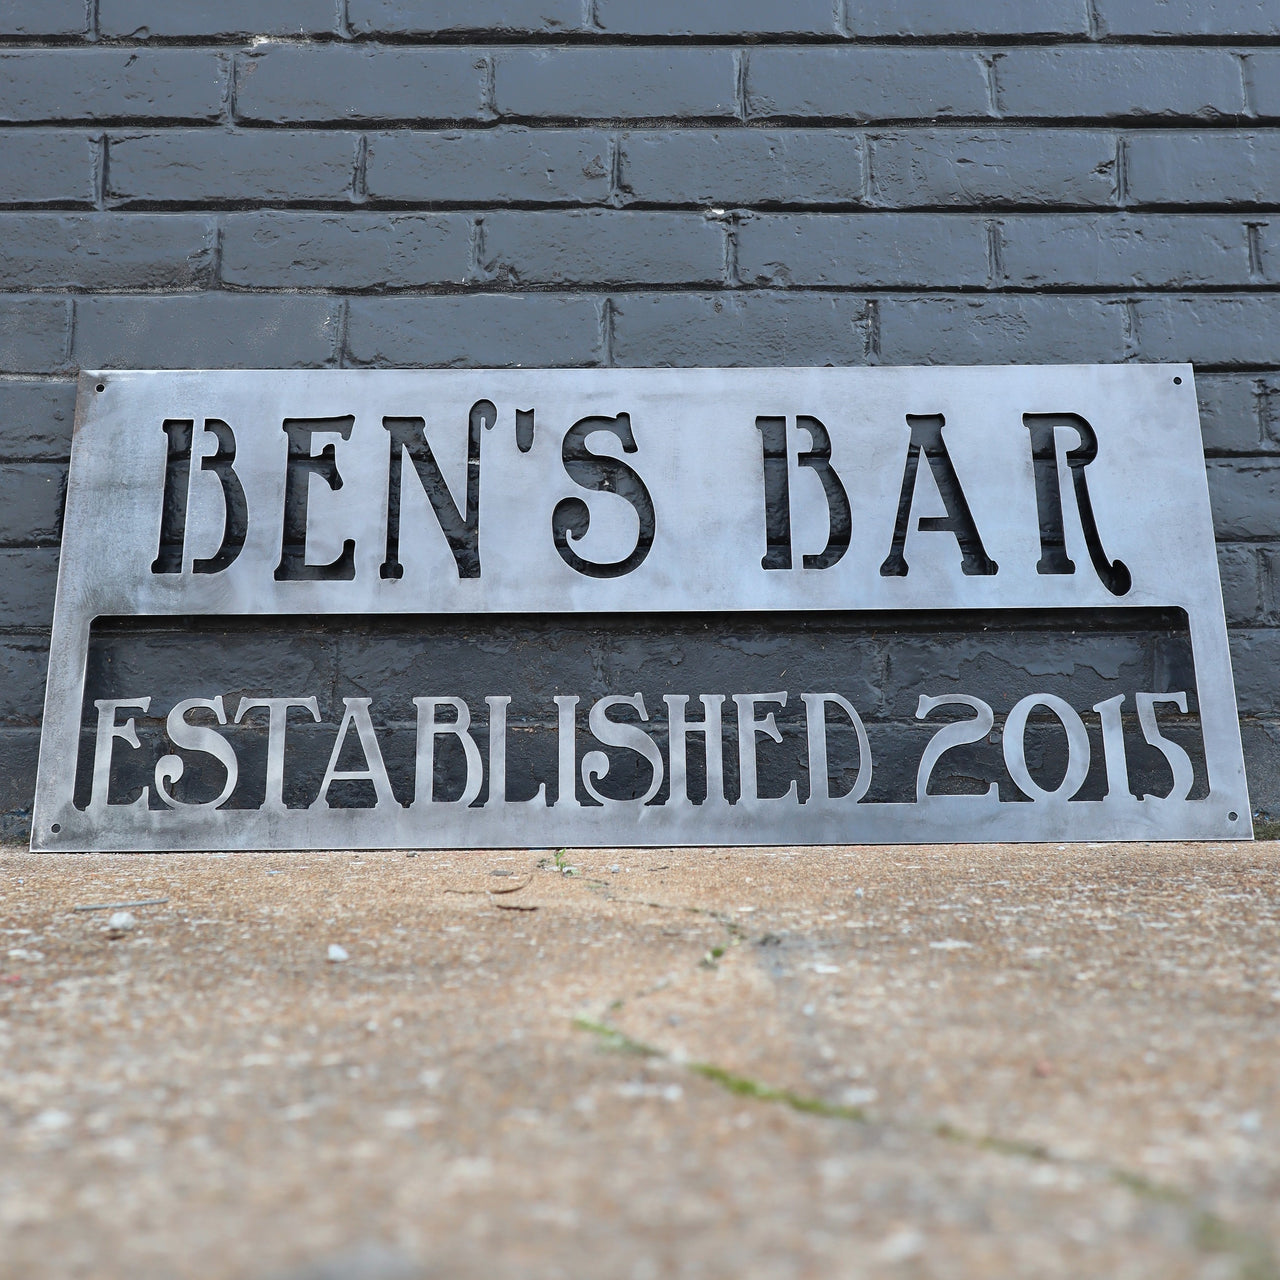 Personalized Metal Bar Sign - Dad's Man Cave Wall Art - Compound, Clubhouse, Outdoor Garden Decor